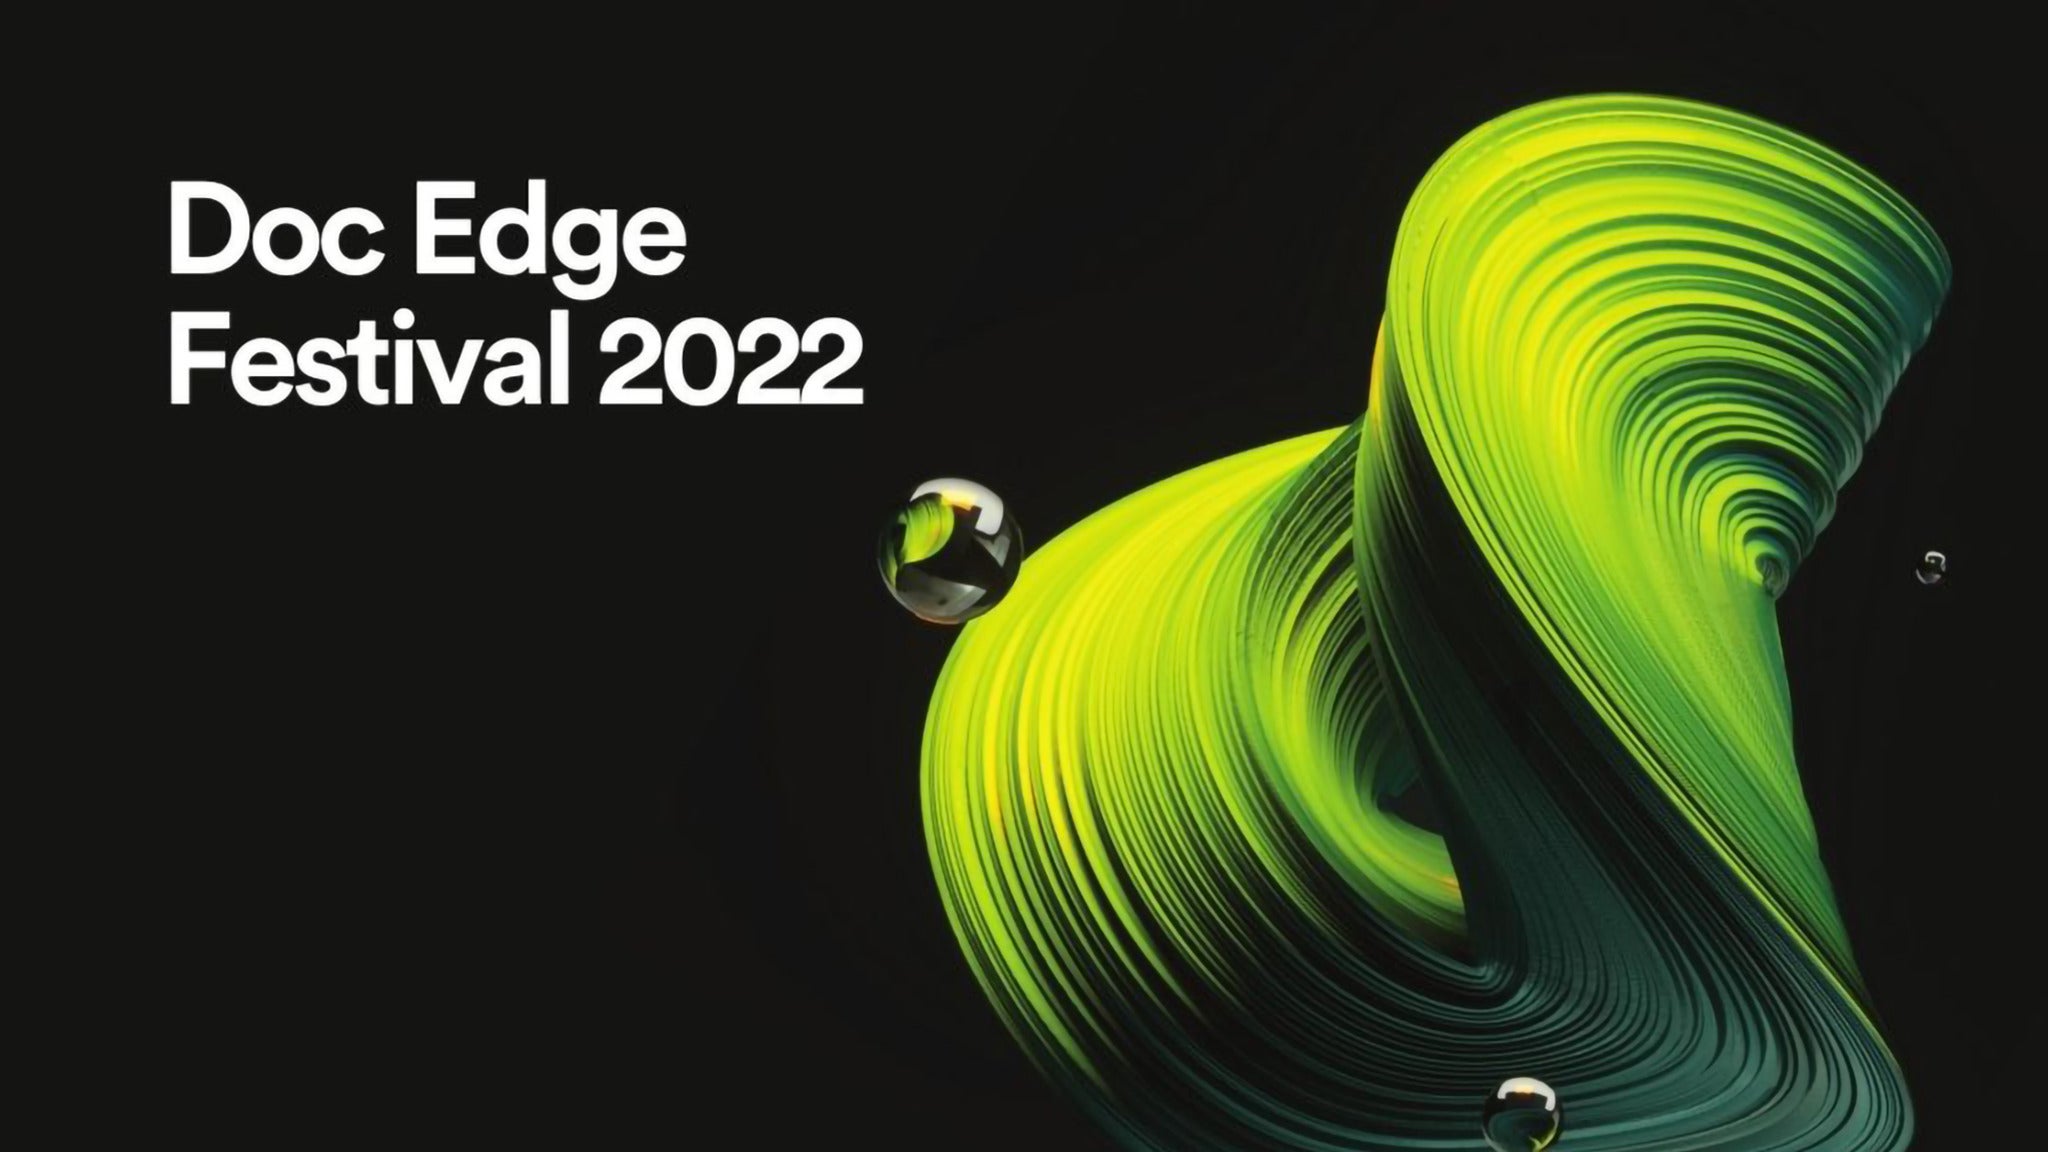 Image used with permission from Ticketmaster | Doc Edge Festival 2022: Fiddlers Journey to the Big Screen tickets